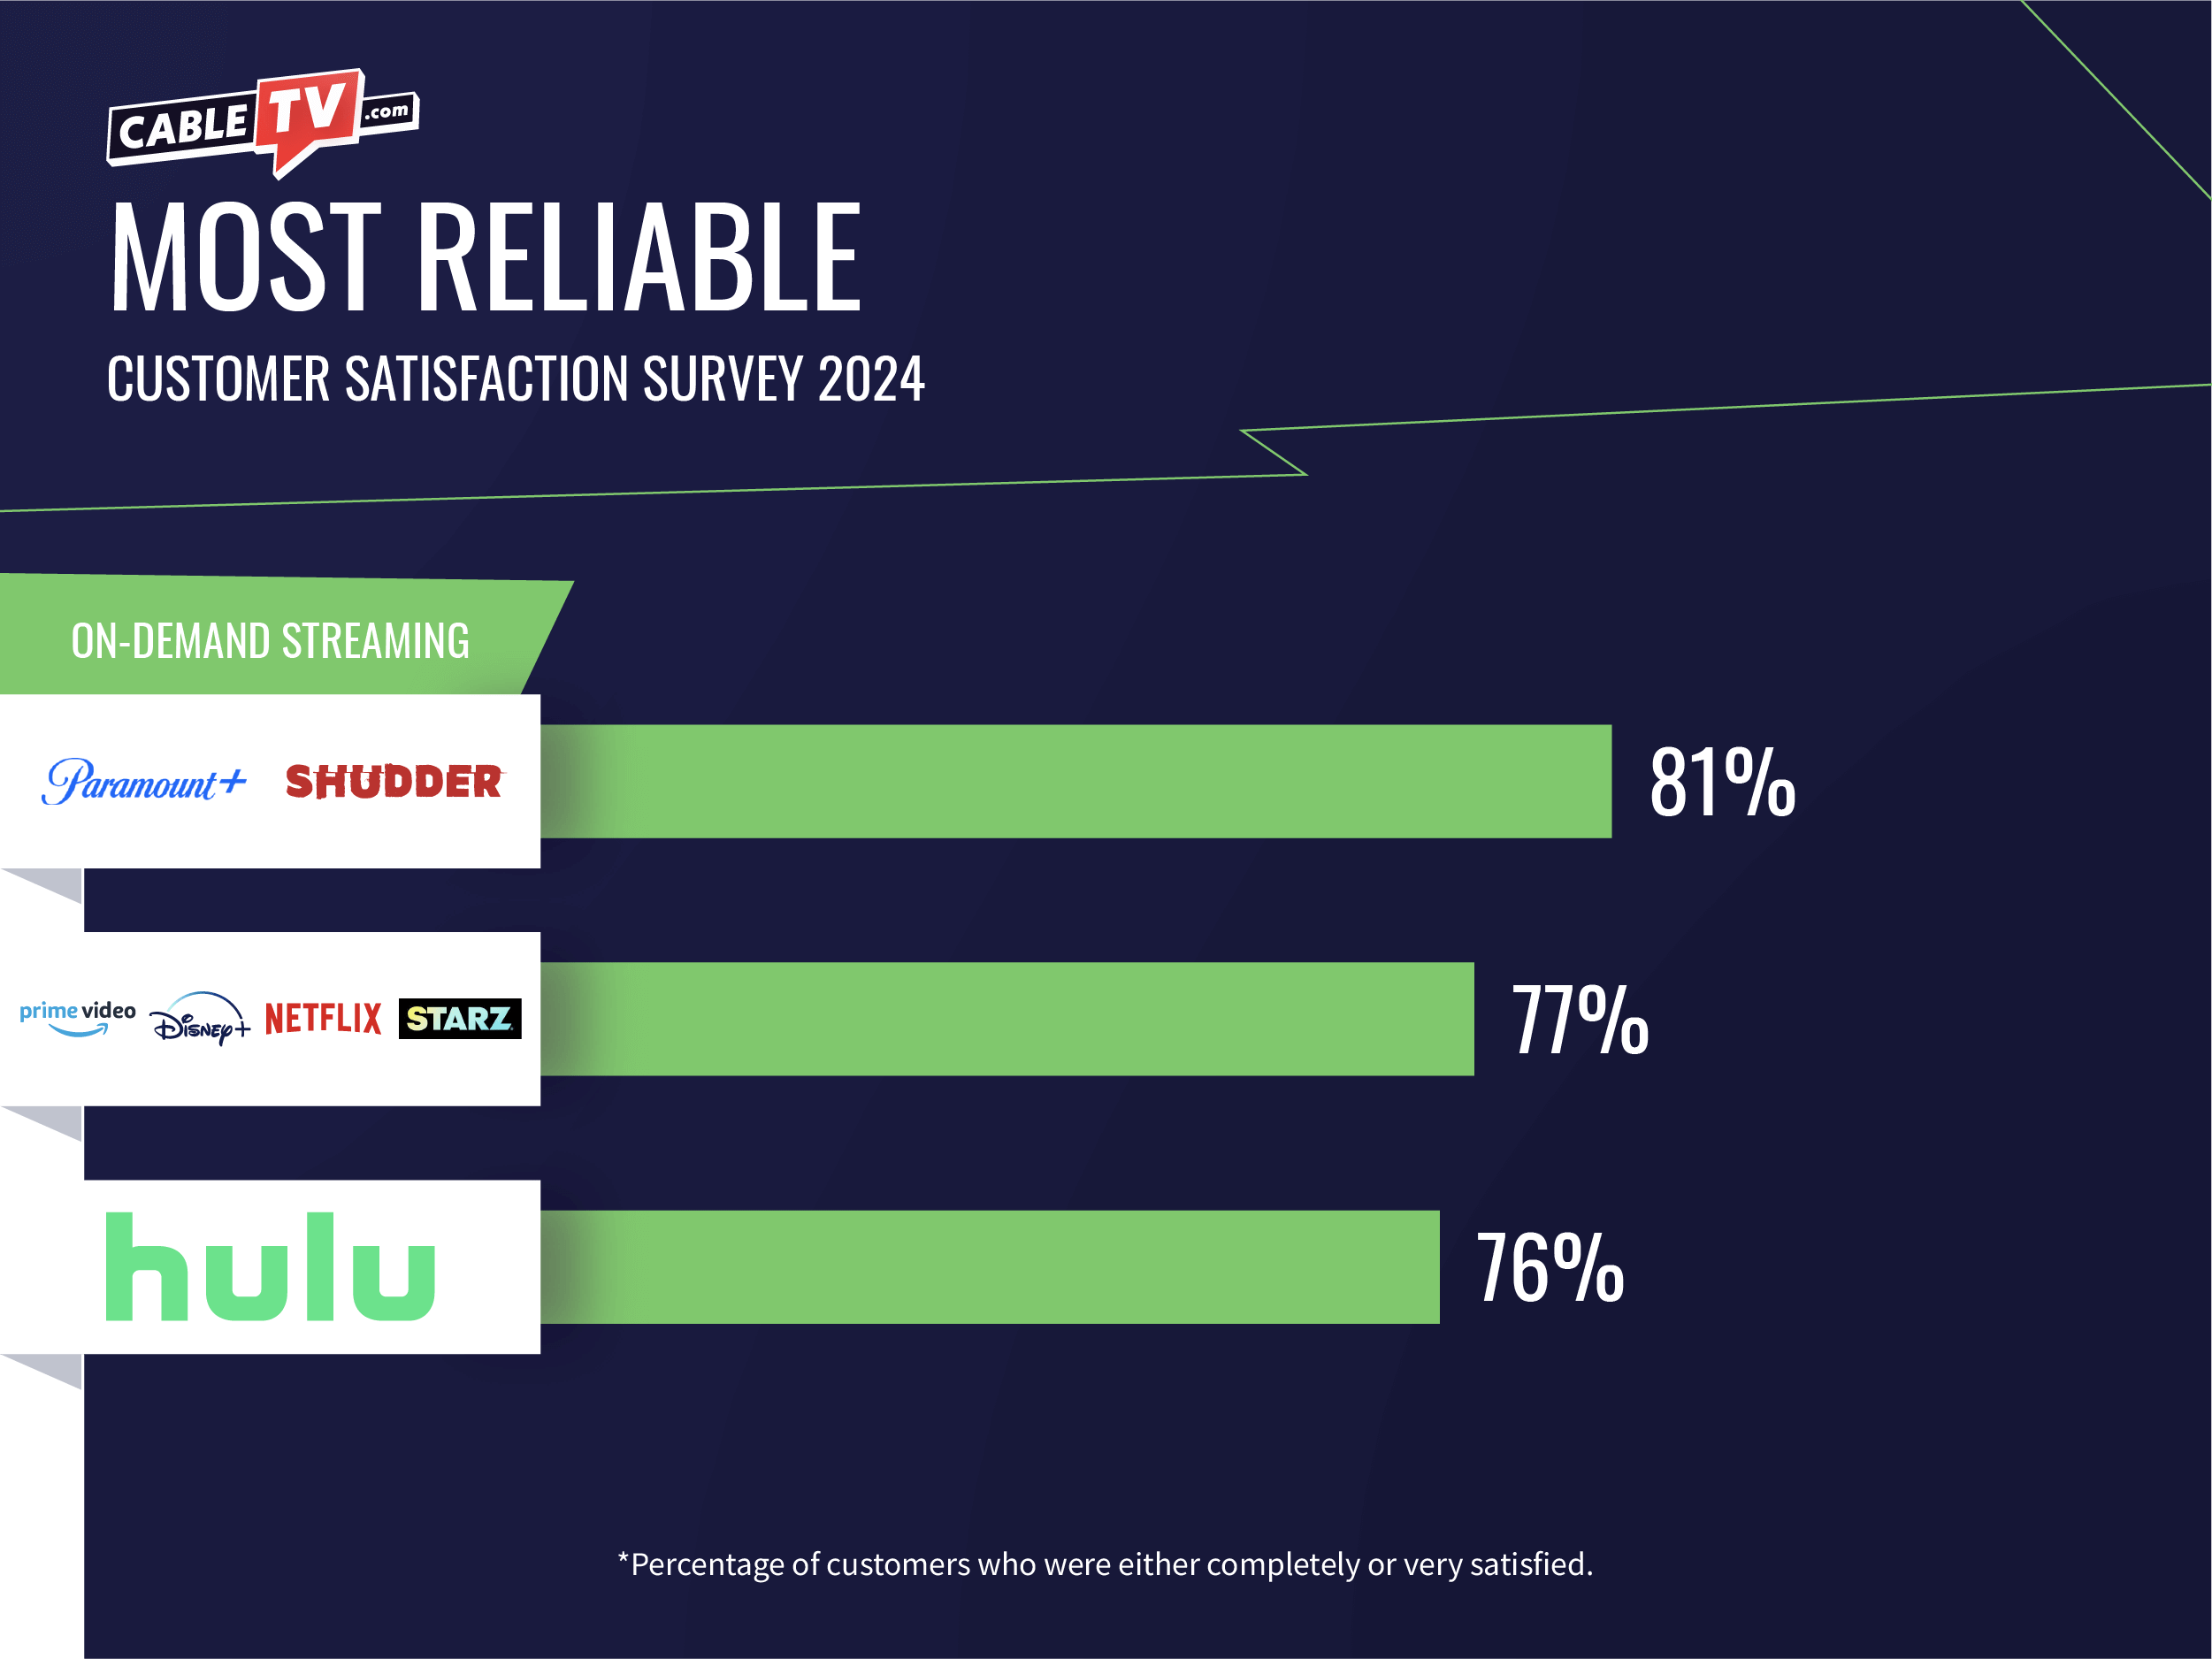 Paramount+ and Shudder tie for most reliable at 81%